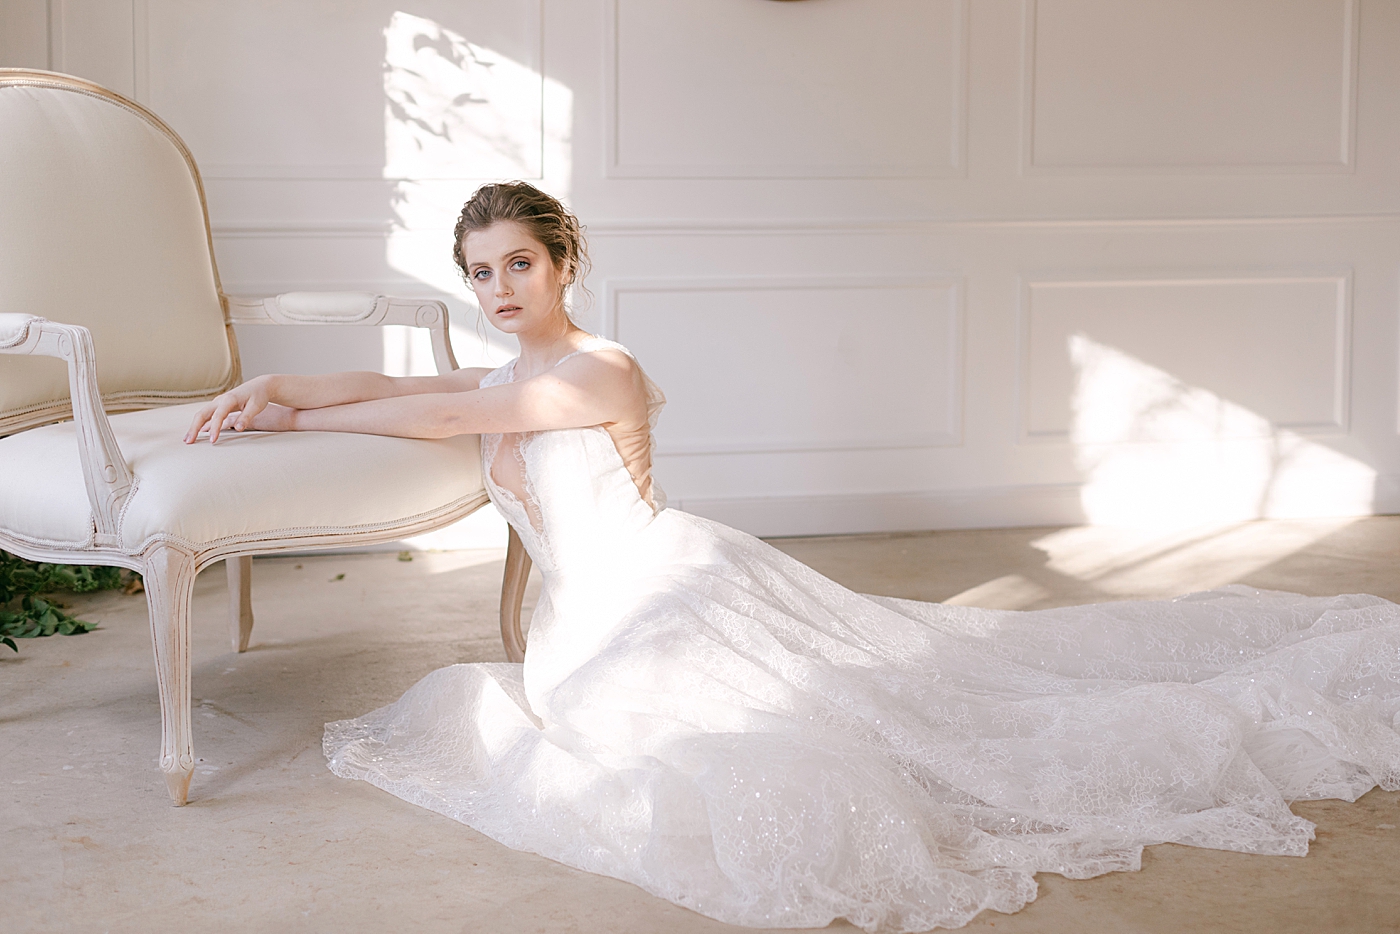 Bride in a gown sitting on a floor near a chair | Photo by Hope Helmuth Photograpghy